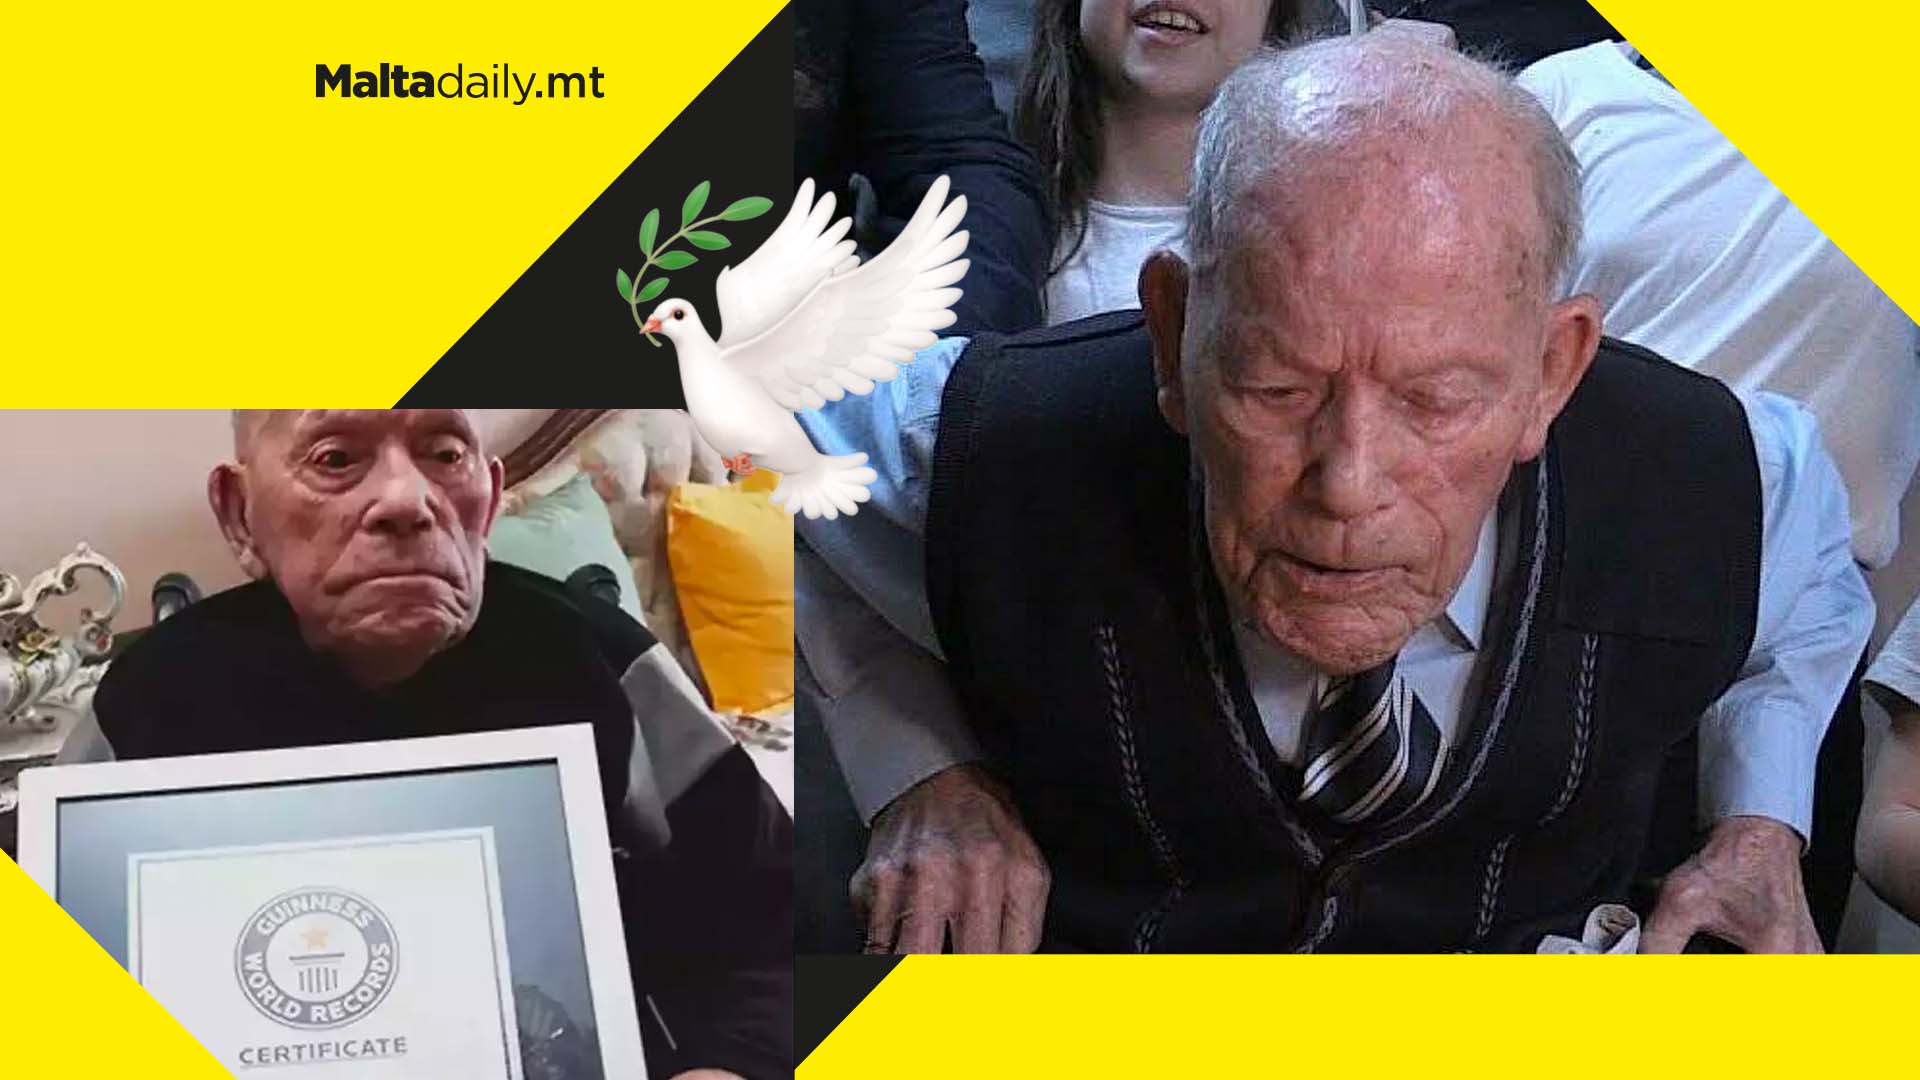 World’s oldest man passes away just before his 113th birthday